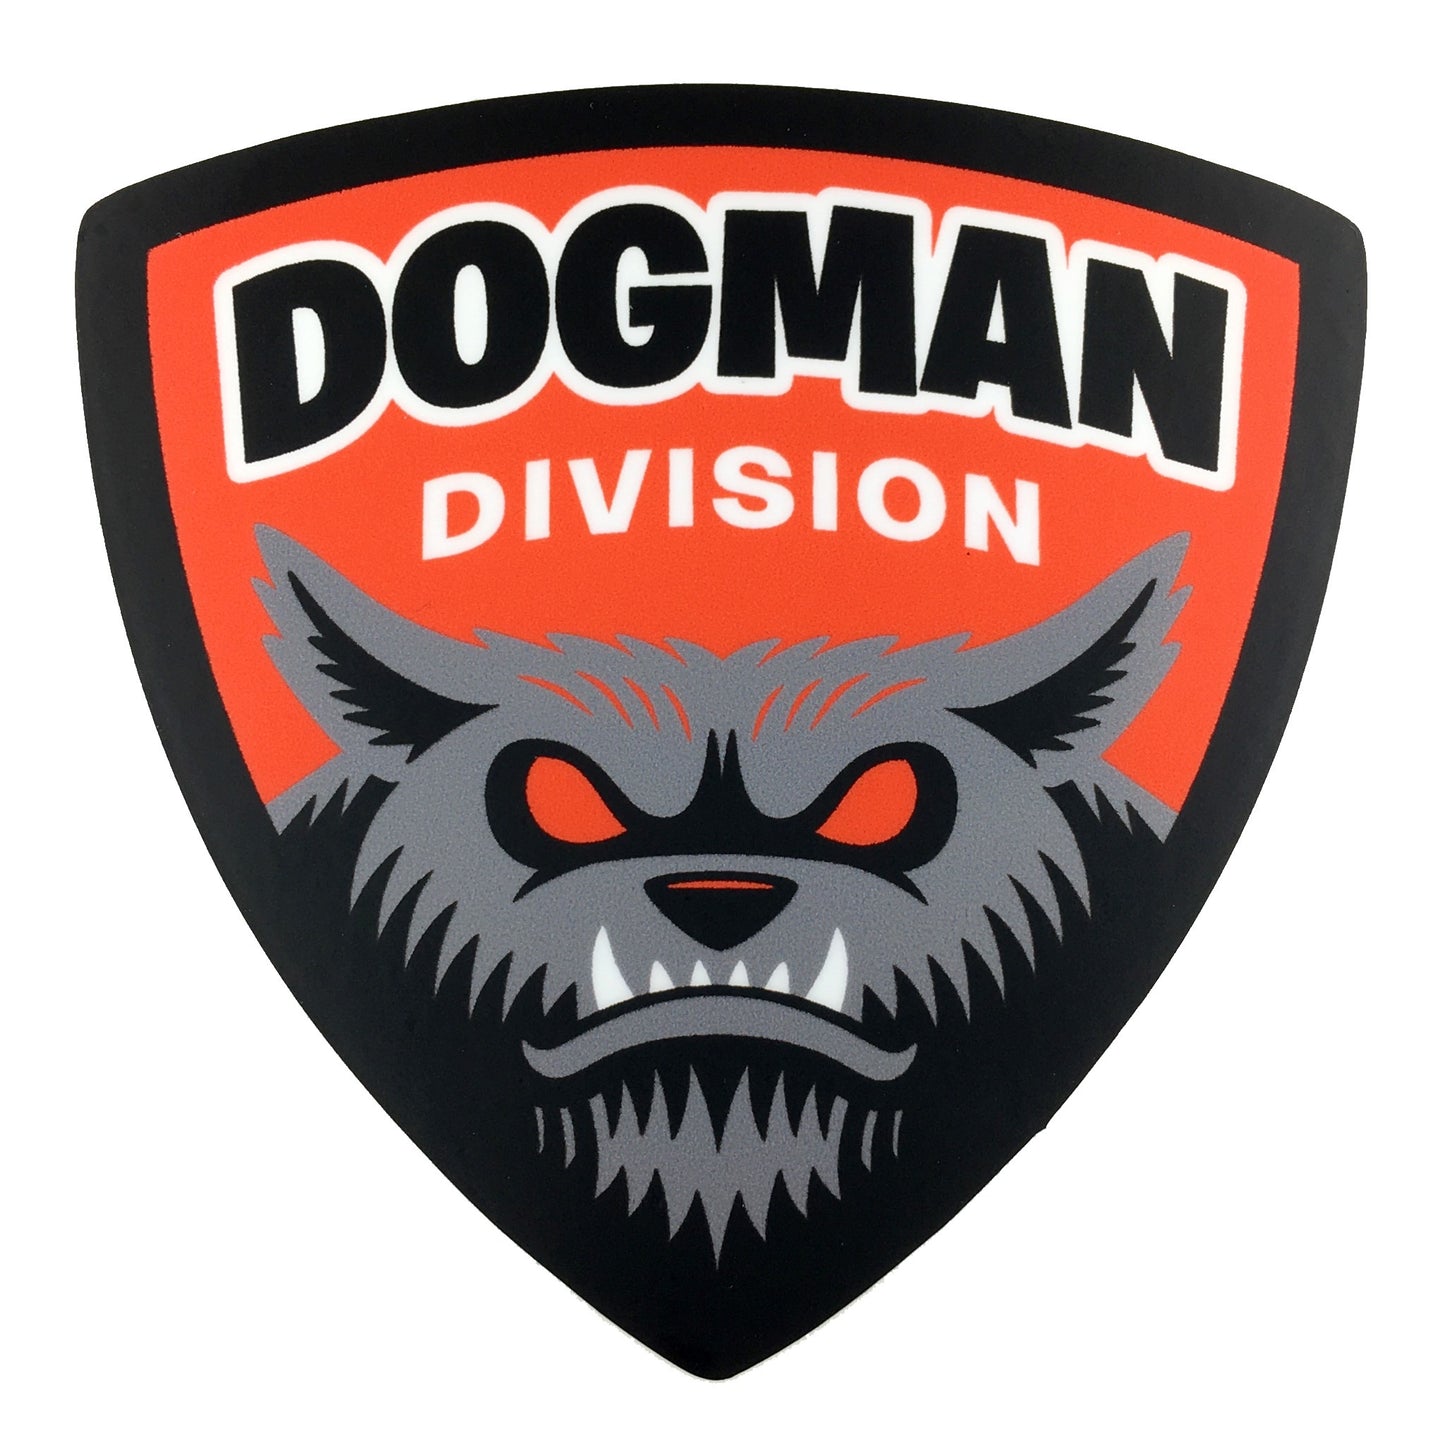 Dogman Division sticker by Monsterologist